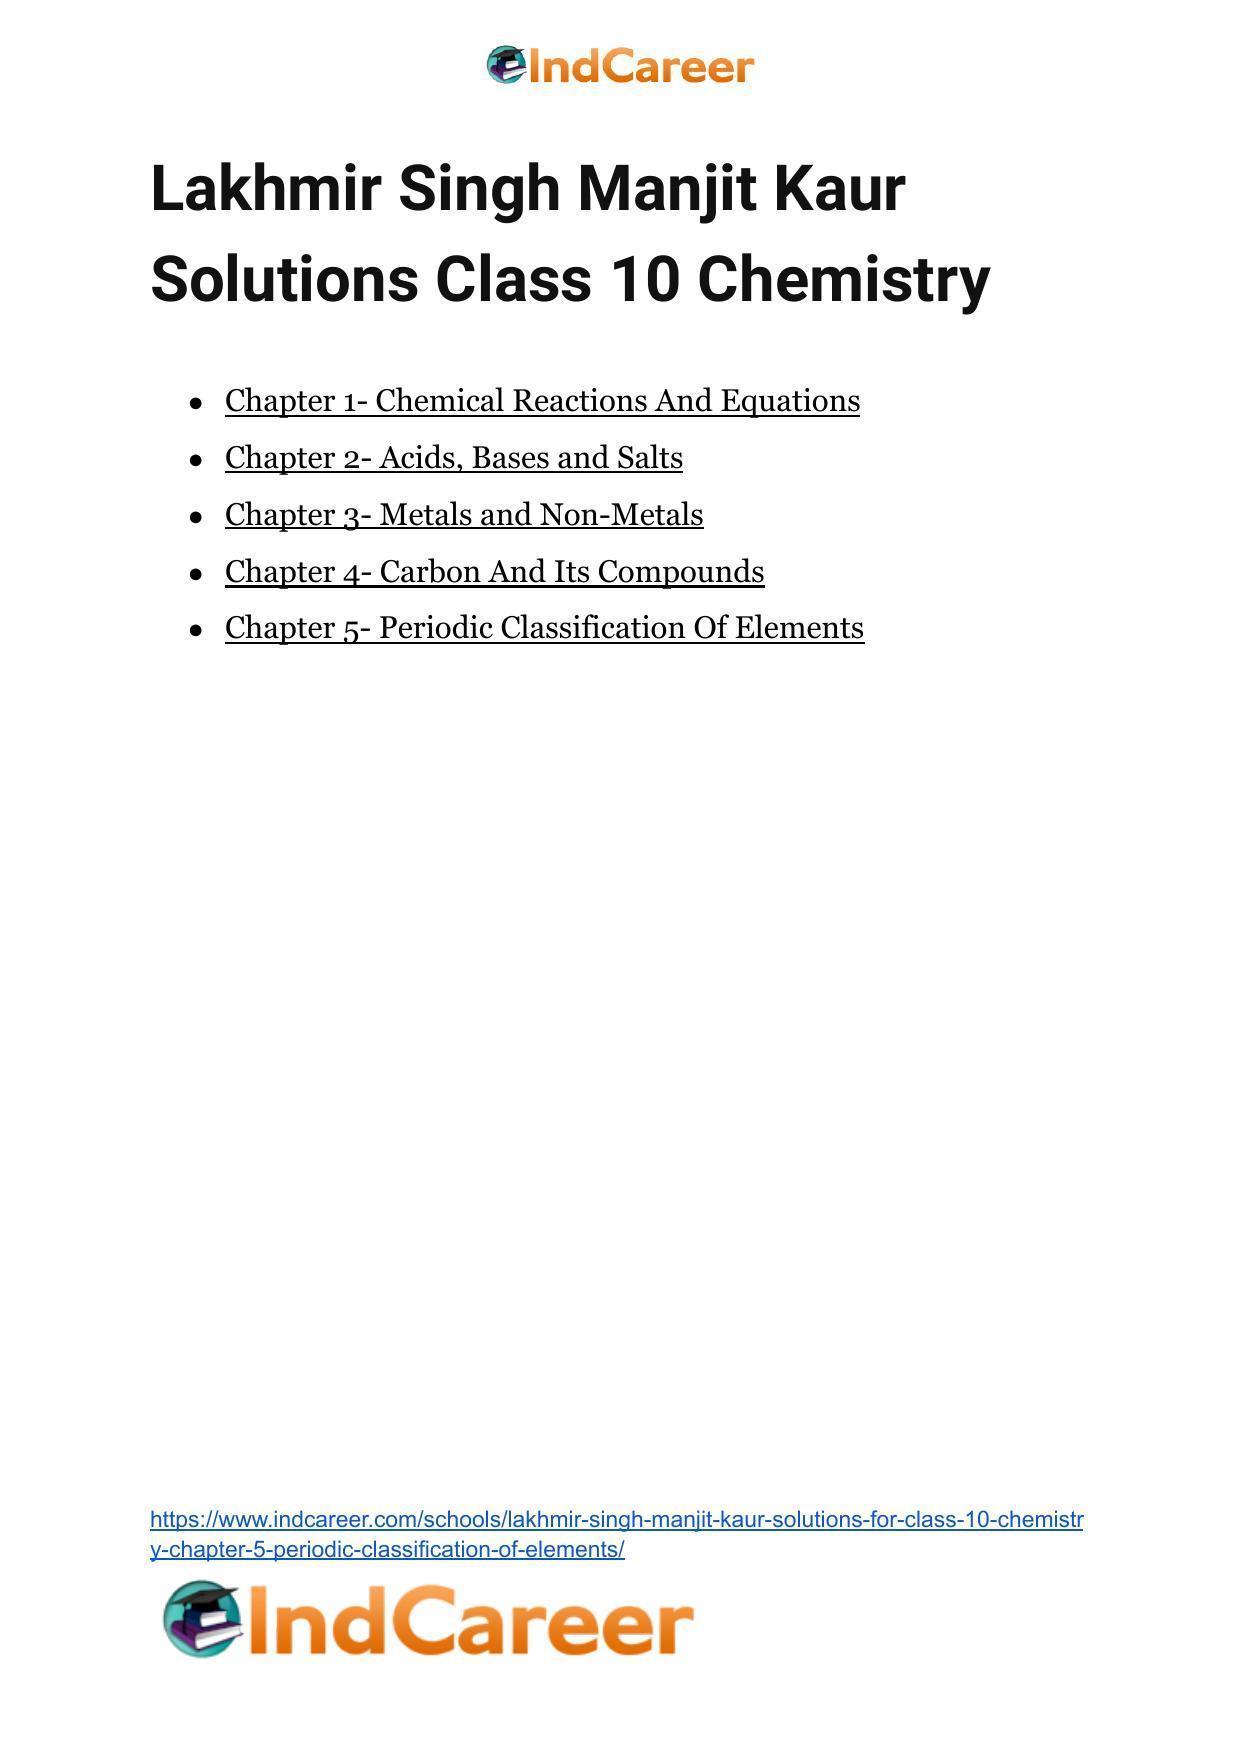 Lakhmir Singh Manjit Kaur  Solutions for Class 10 Chemistry: Chapter 5- Periodic Classification Of Elements - Page 37